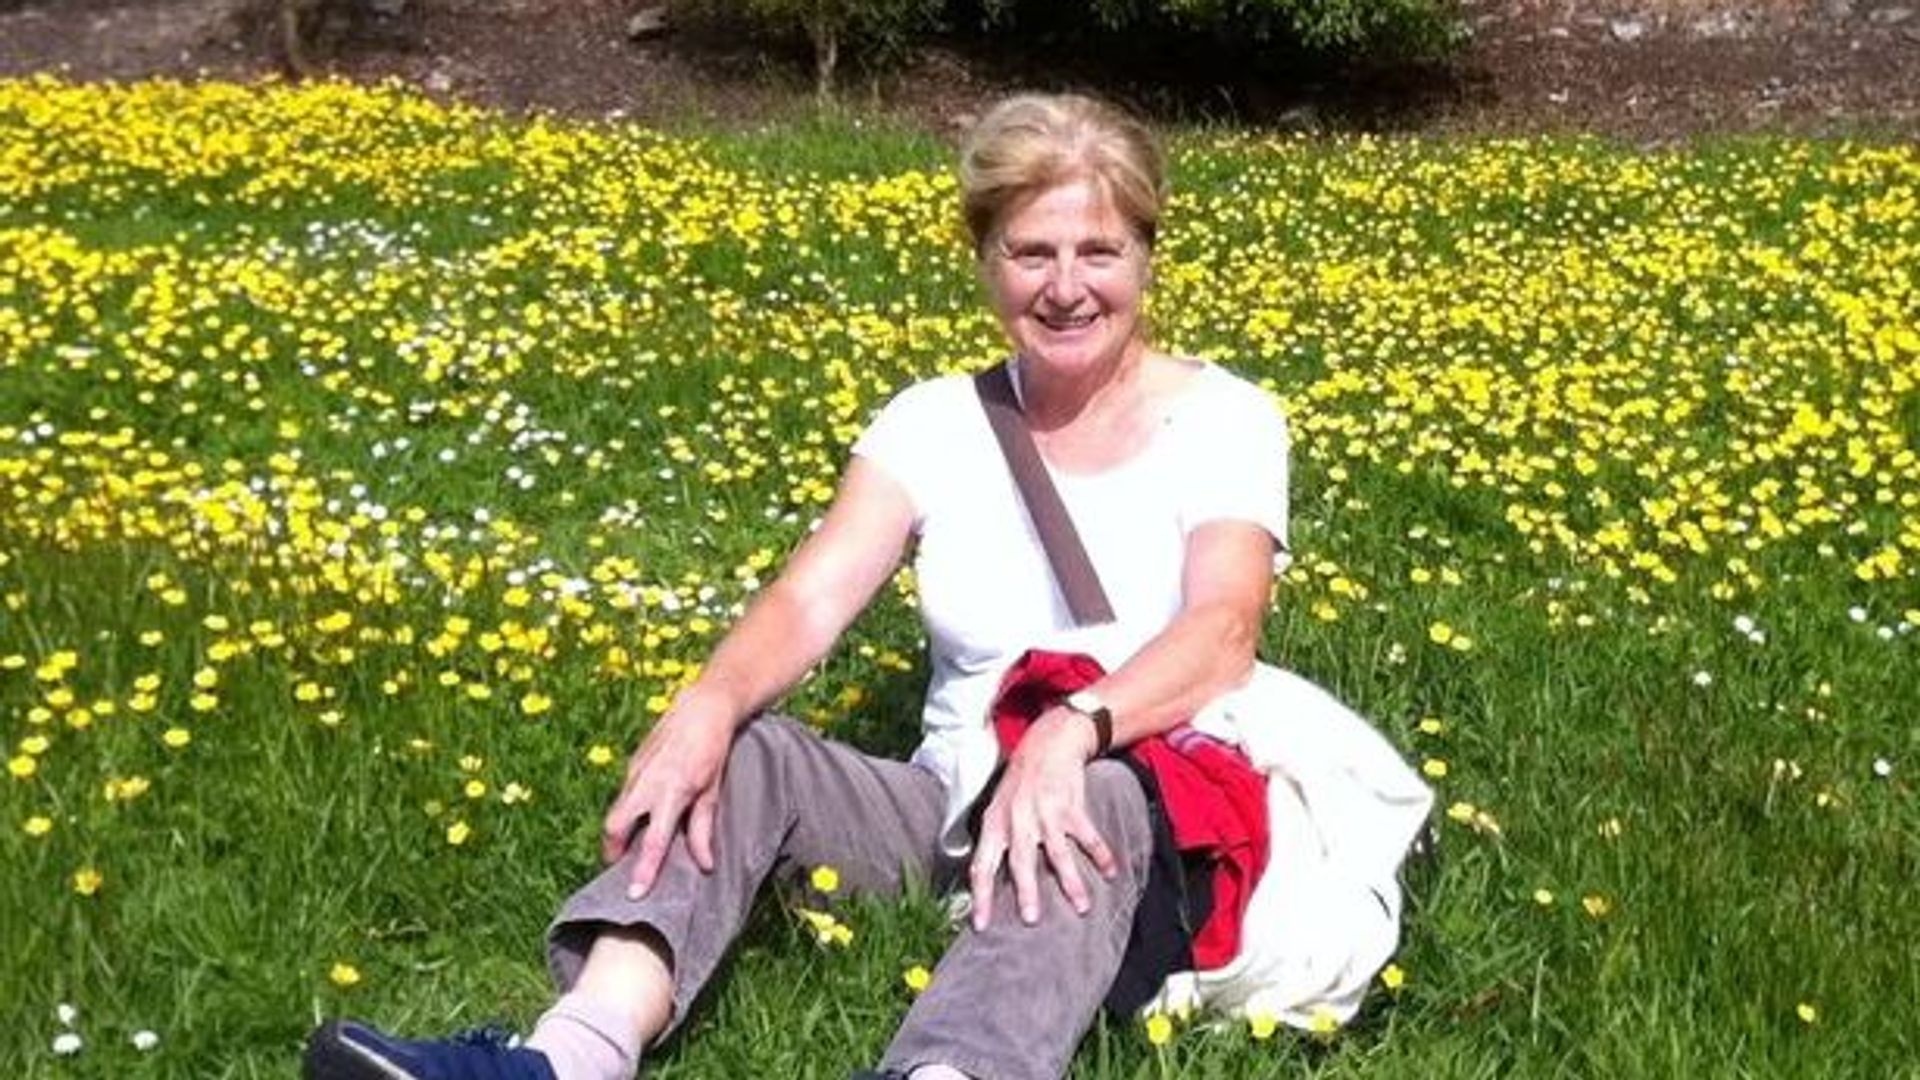 Diabetic woman died 'after she stopped taking insulin at workshop run by alternative healer'